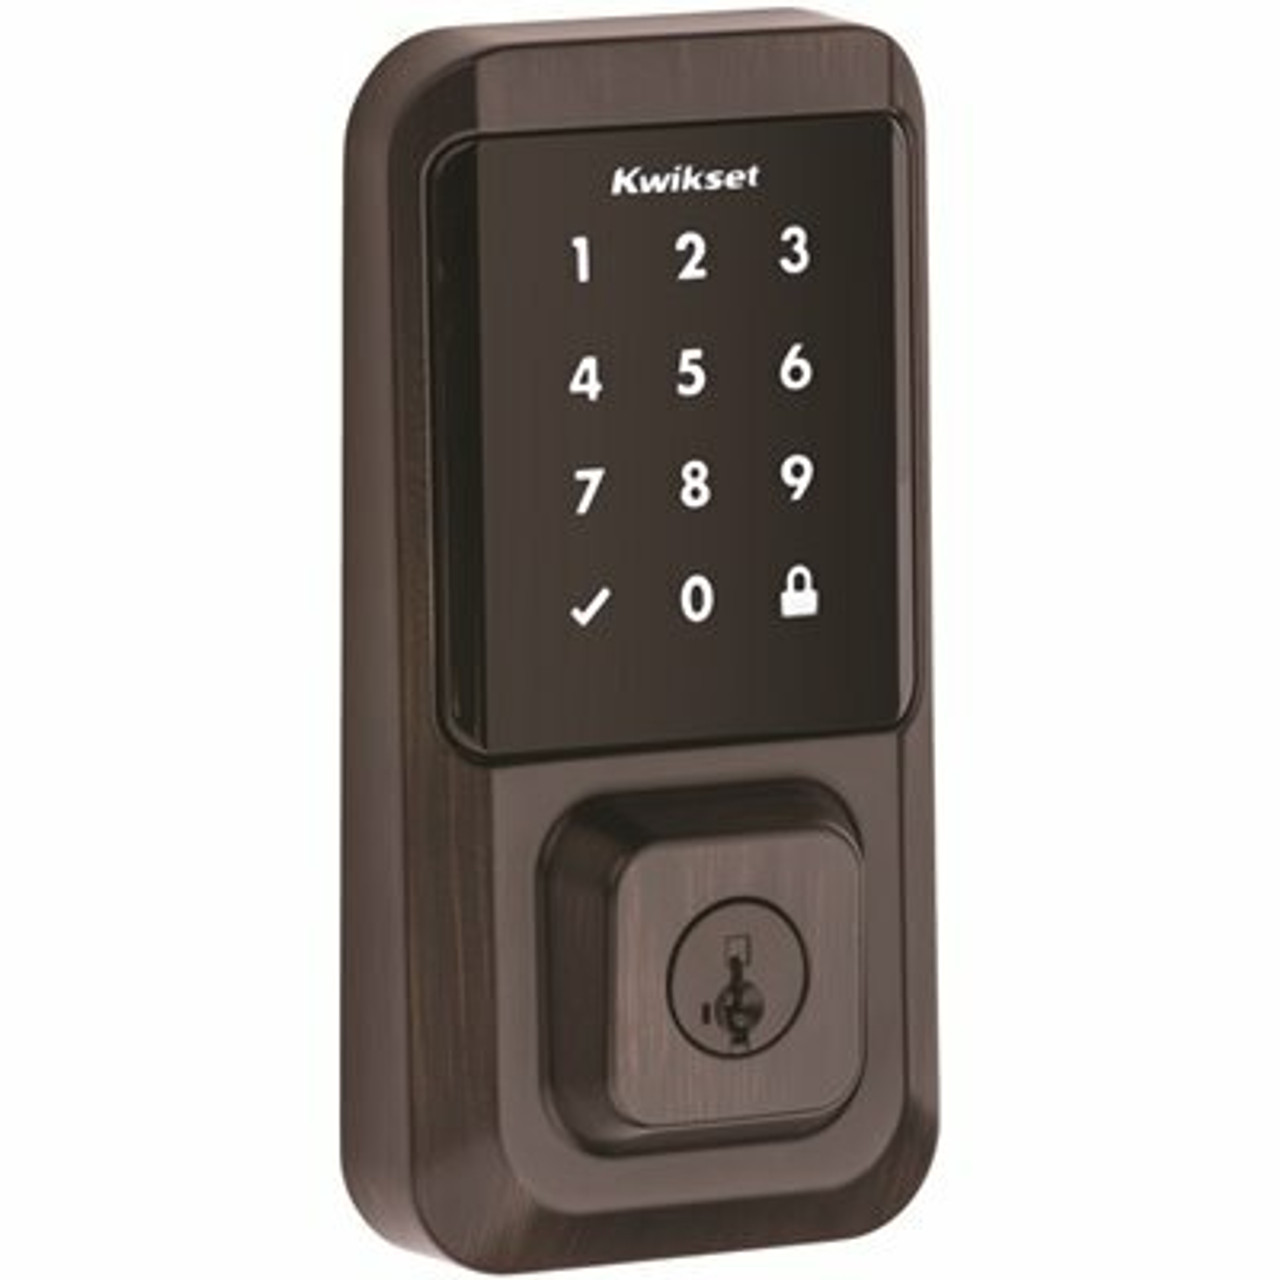 Halo Venetian Bronze Single-Cylinder Electronic Smart Lock Deadbolt Featuring Smartkey Security, Touchscreen And Wi-Fi